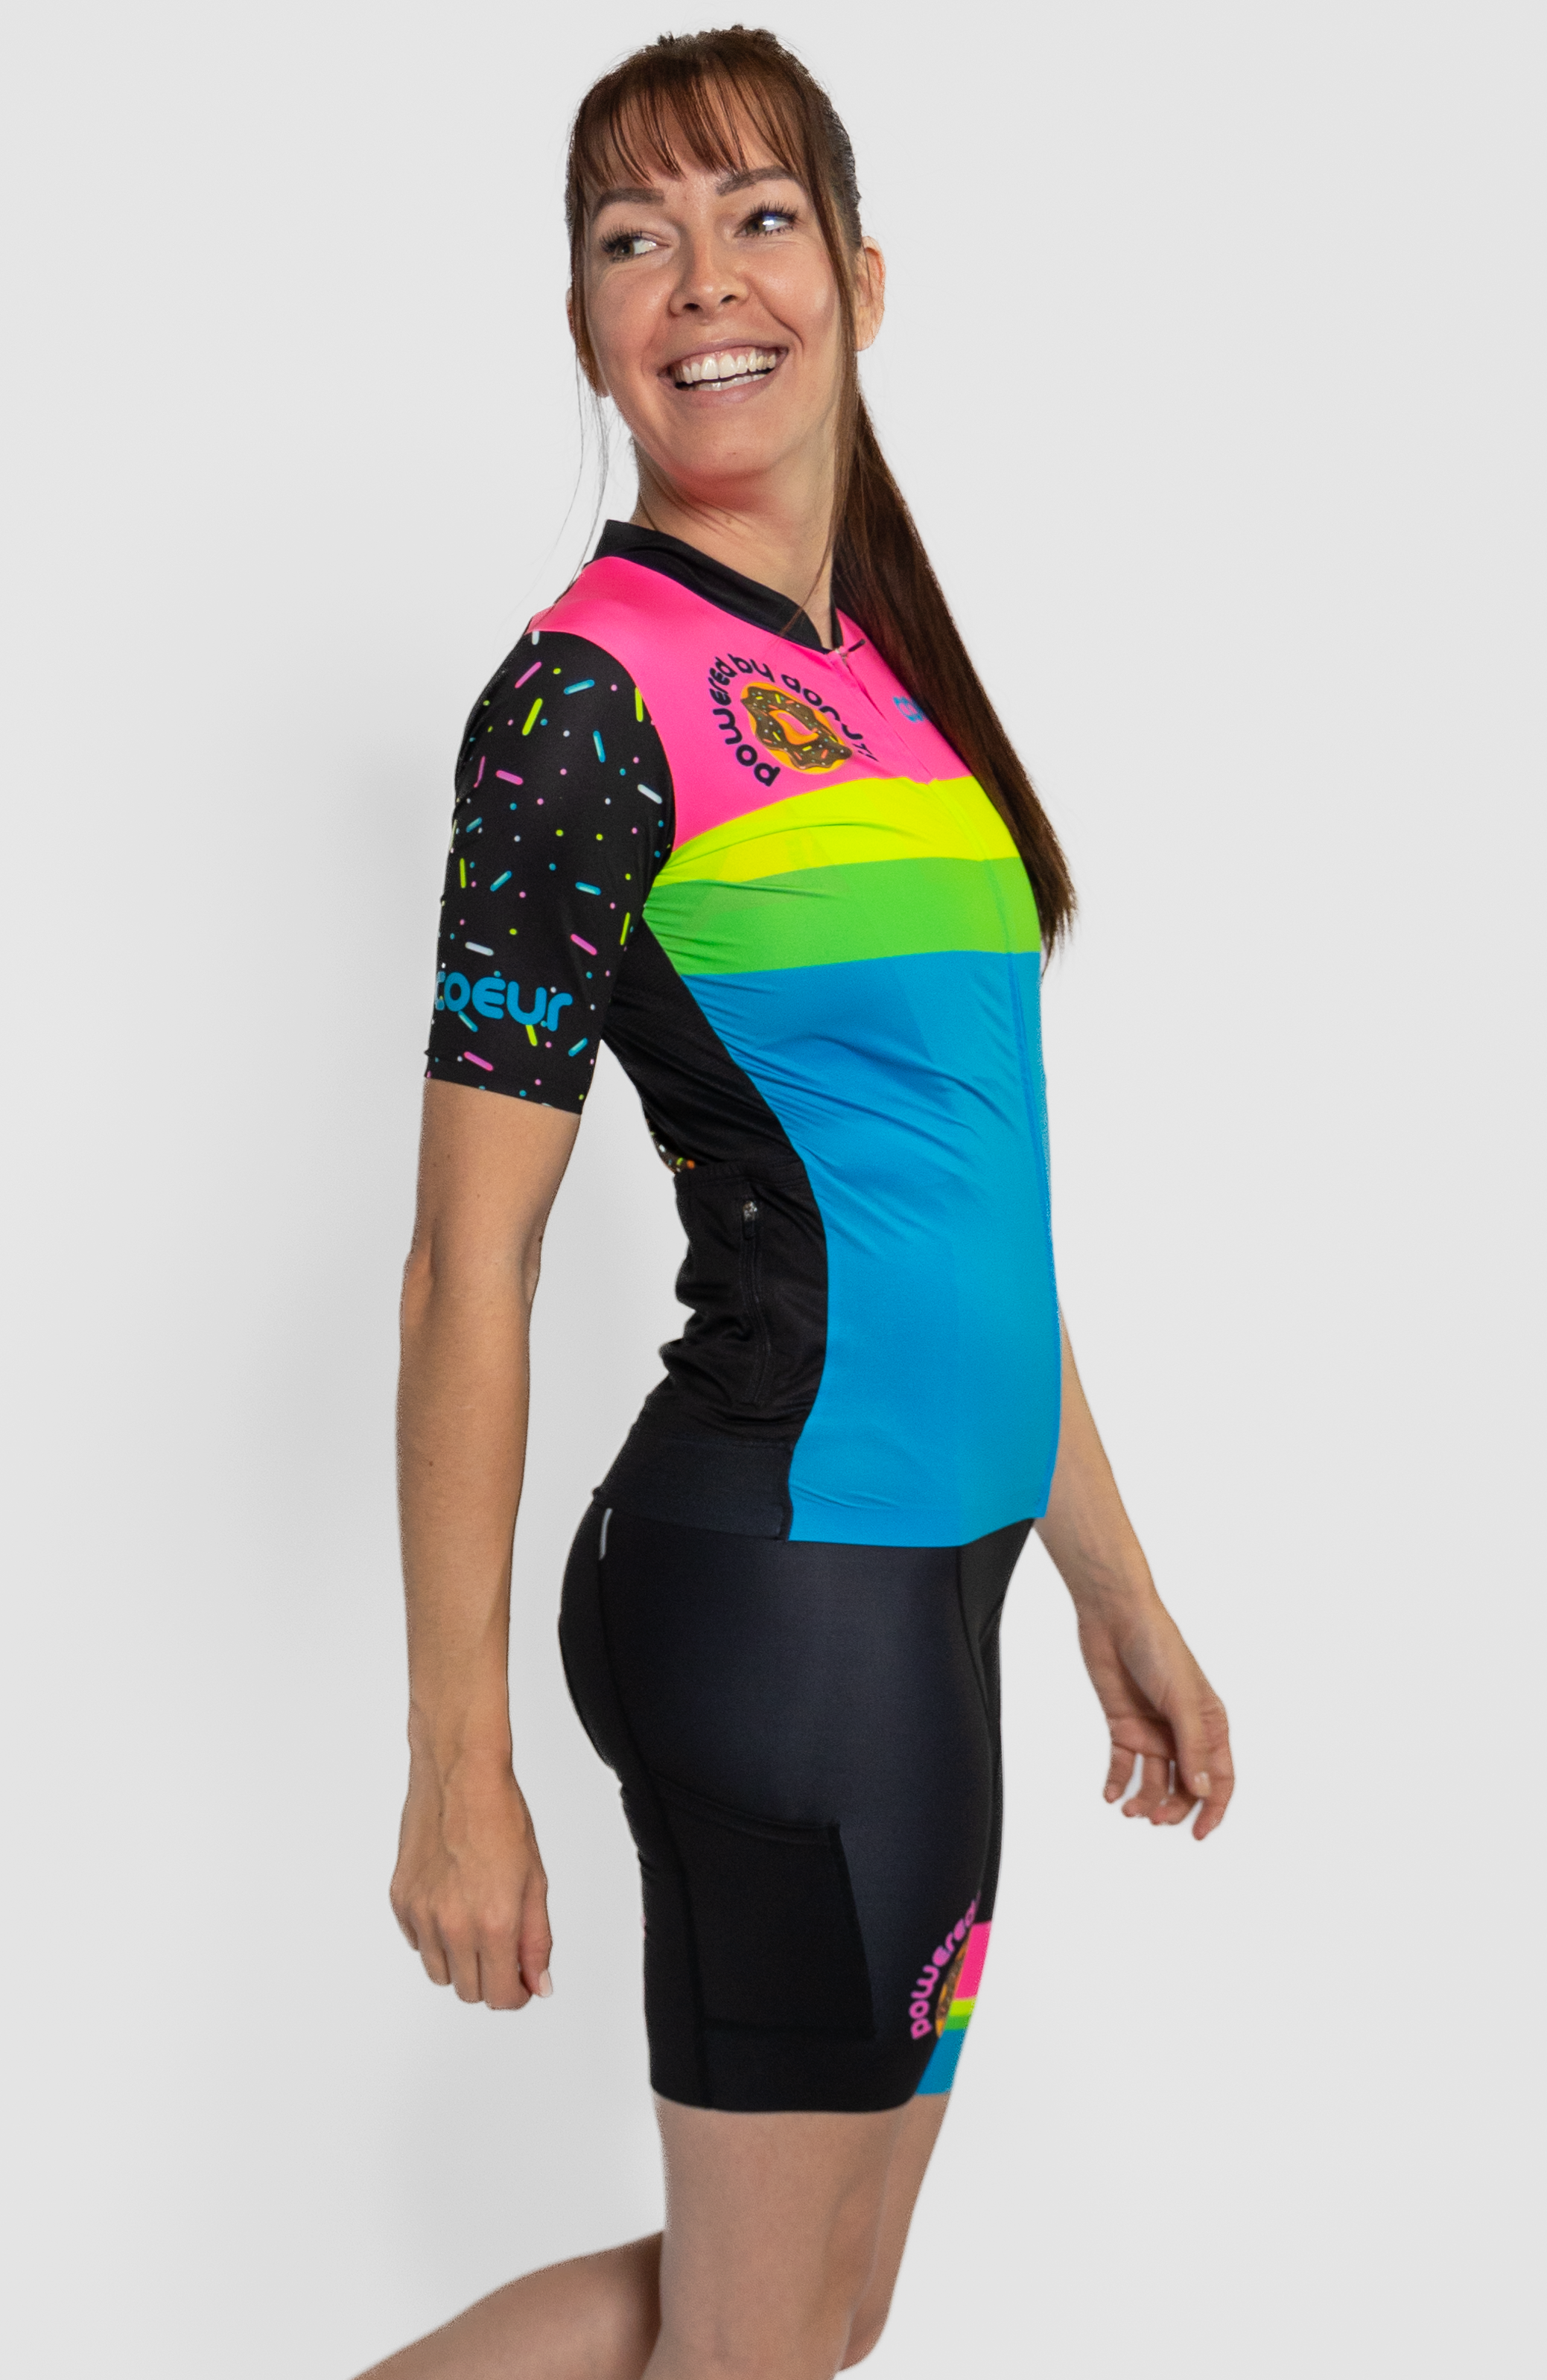 Coeur Sports Cycling Jersey Powered By Donuts Women's Cycling Jersey